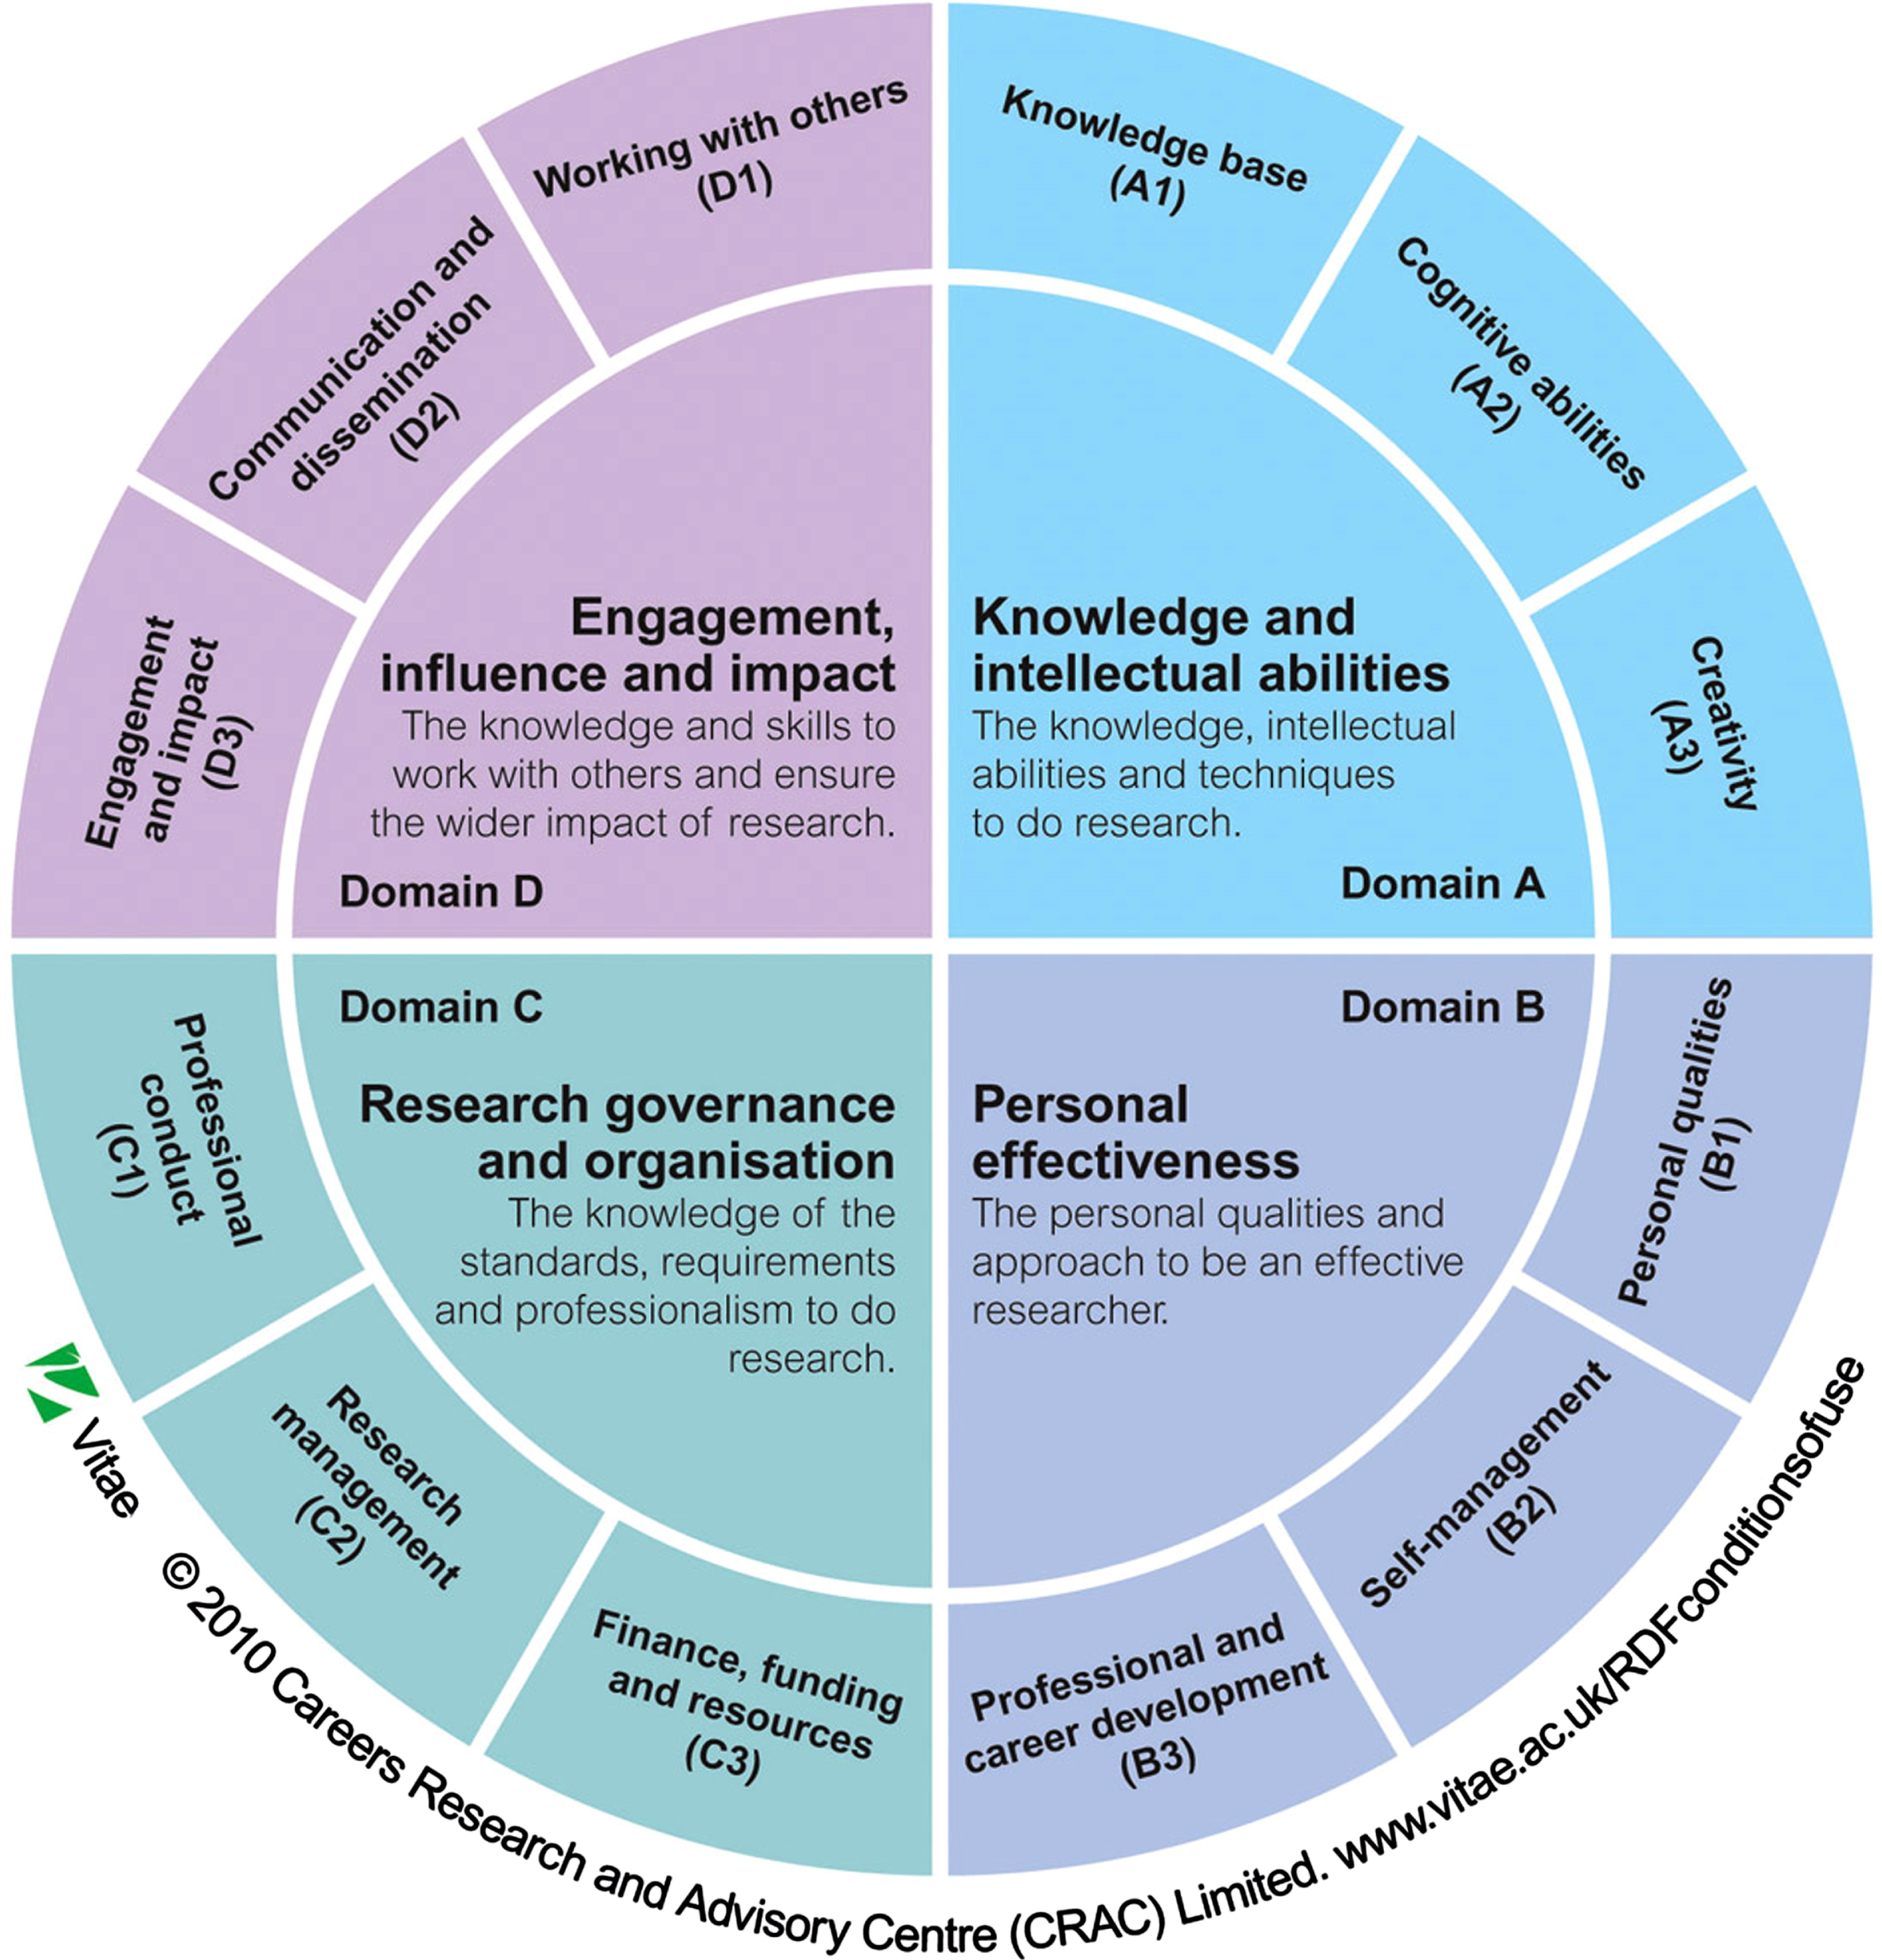 Vitae Research Development Framework (re-produced with permission from Vitae). Source: (Vitae: Researcher Development Framework. Careers Research and Advisory Centre (CRAC) Limited, 2011).